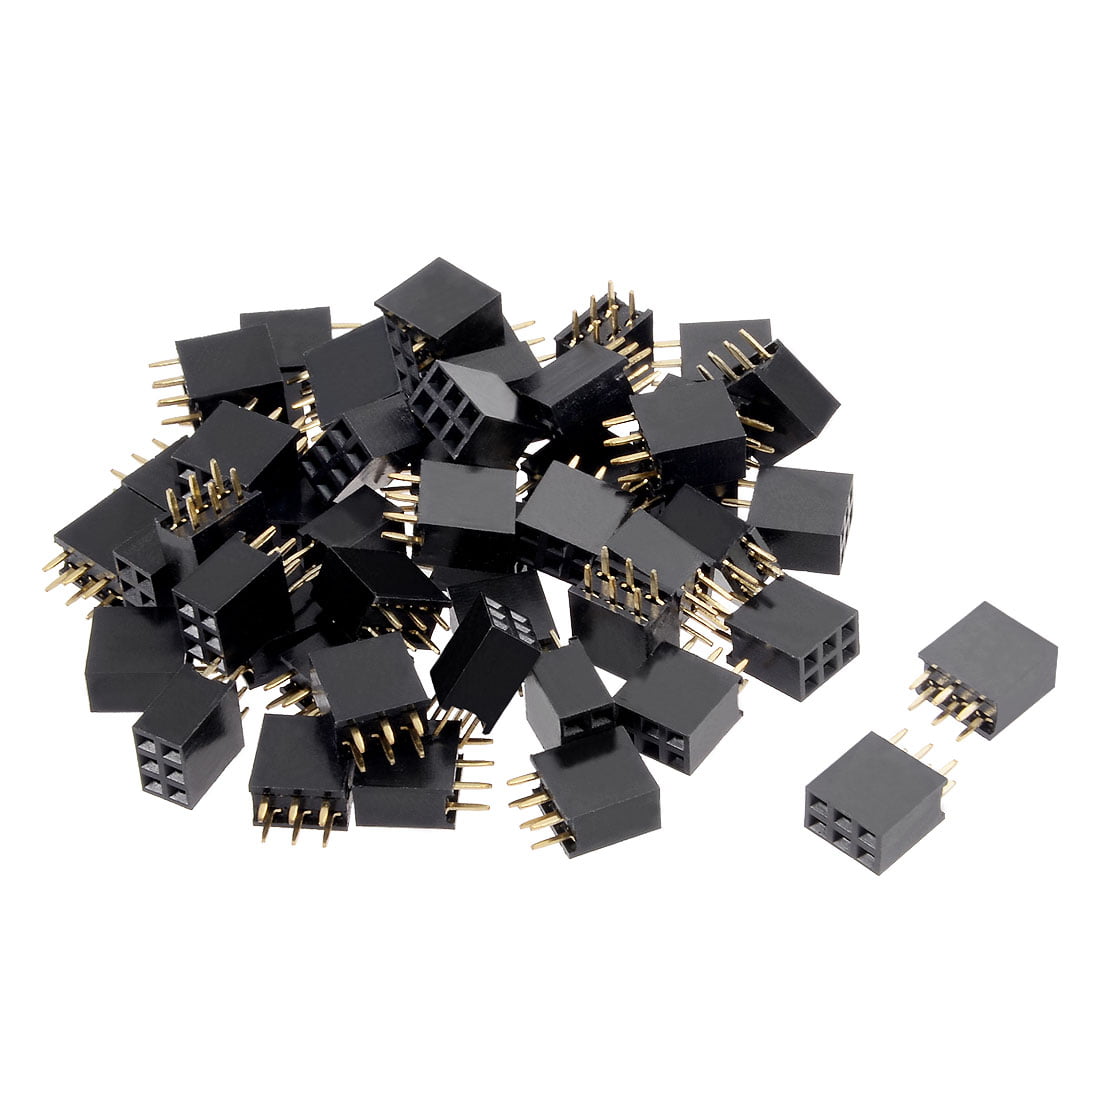 50Pcs 2mm Pitch 2x5 Pin 10 Pin Female Double Row Straight Pin Header Strip 